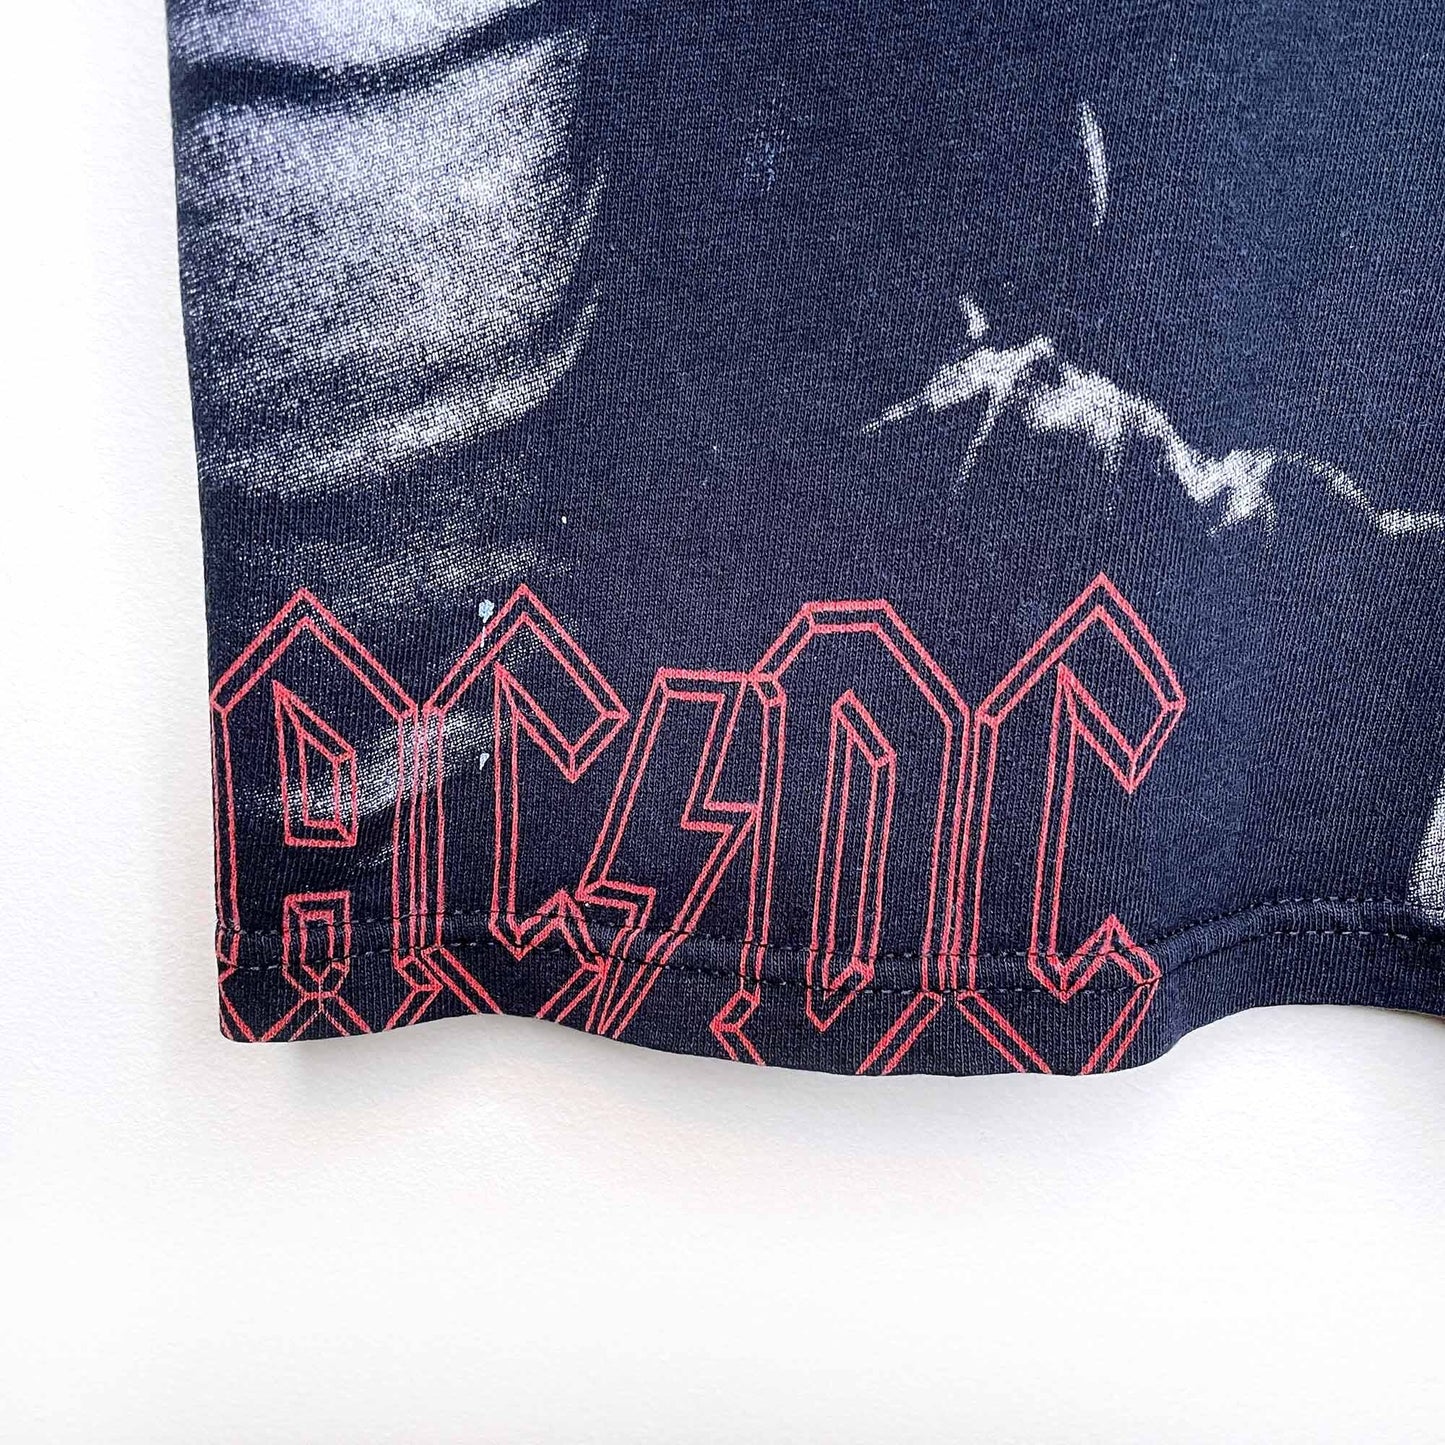 acdc angus young horns graphic band tee - size small